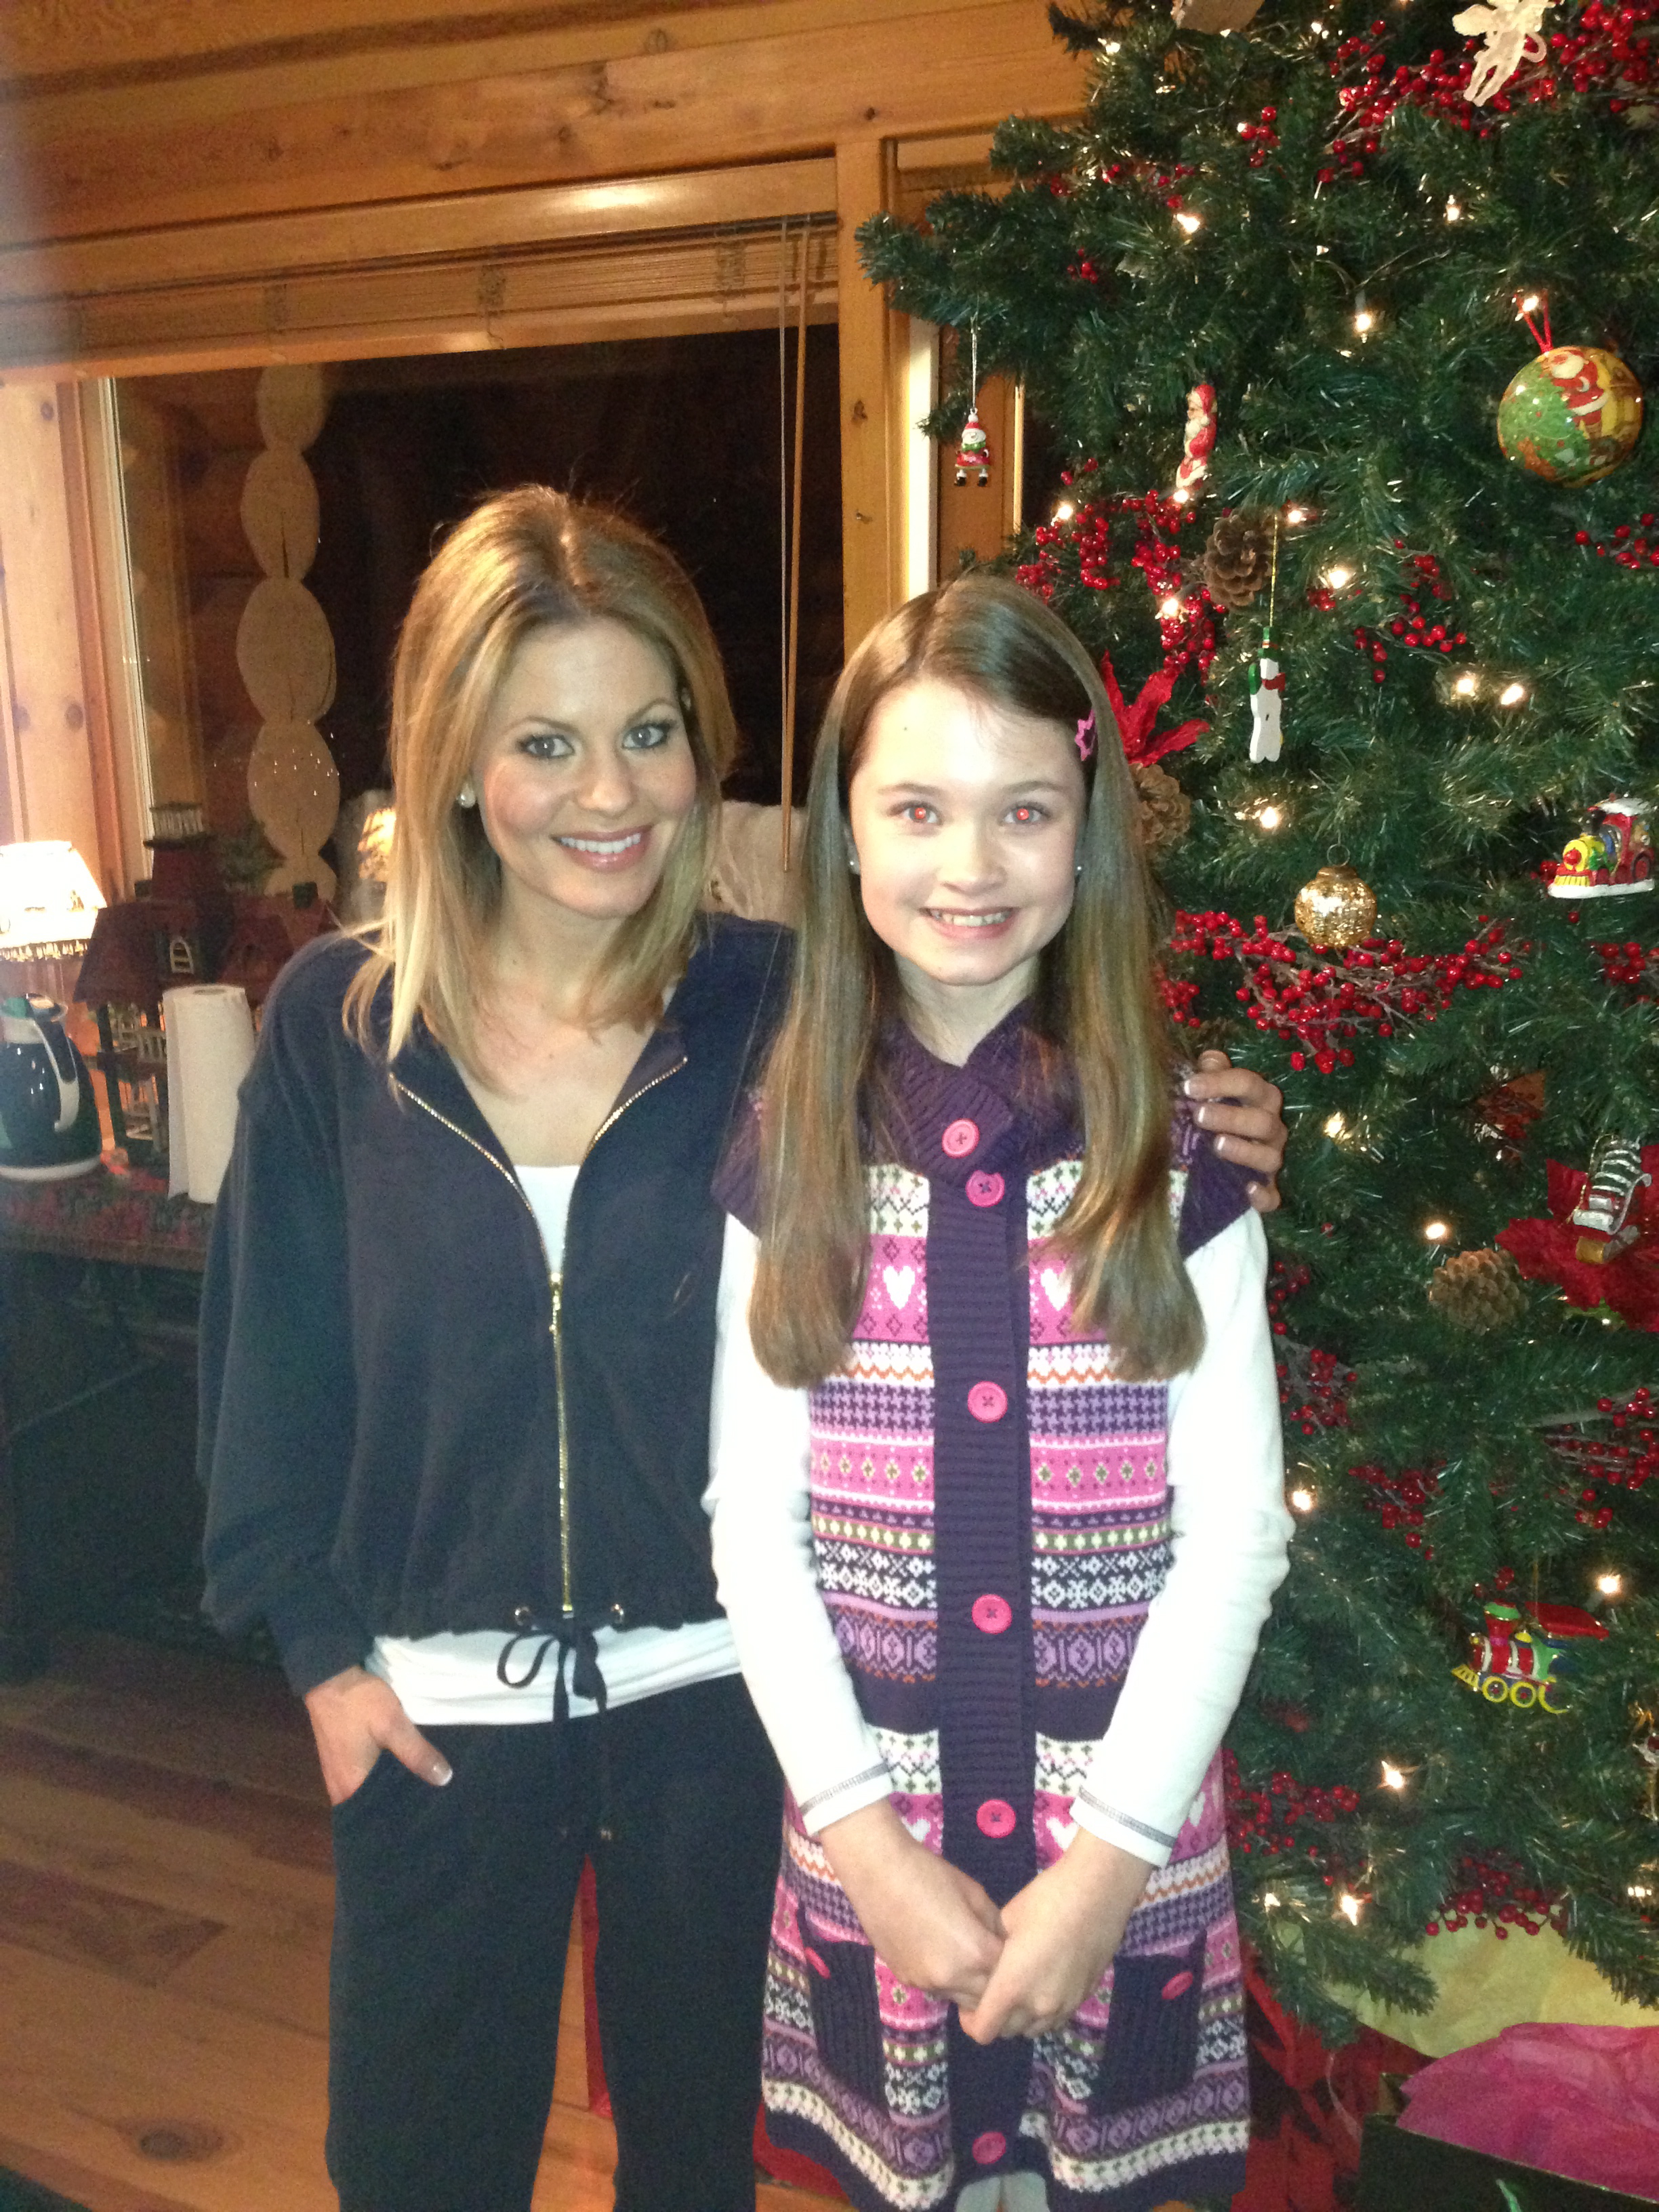 On the set of 'Let it Snow' with Candace Cameron Bure